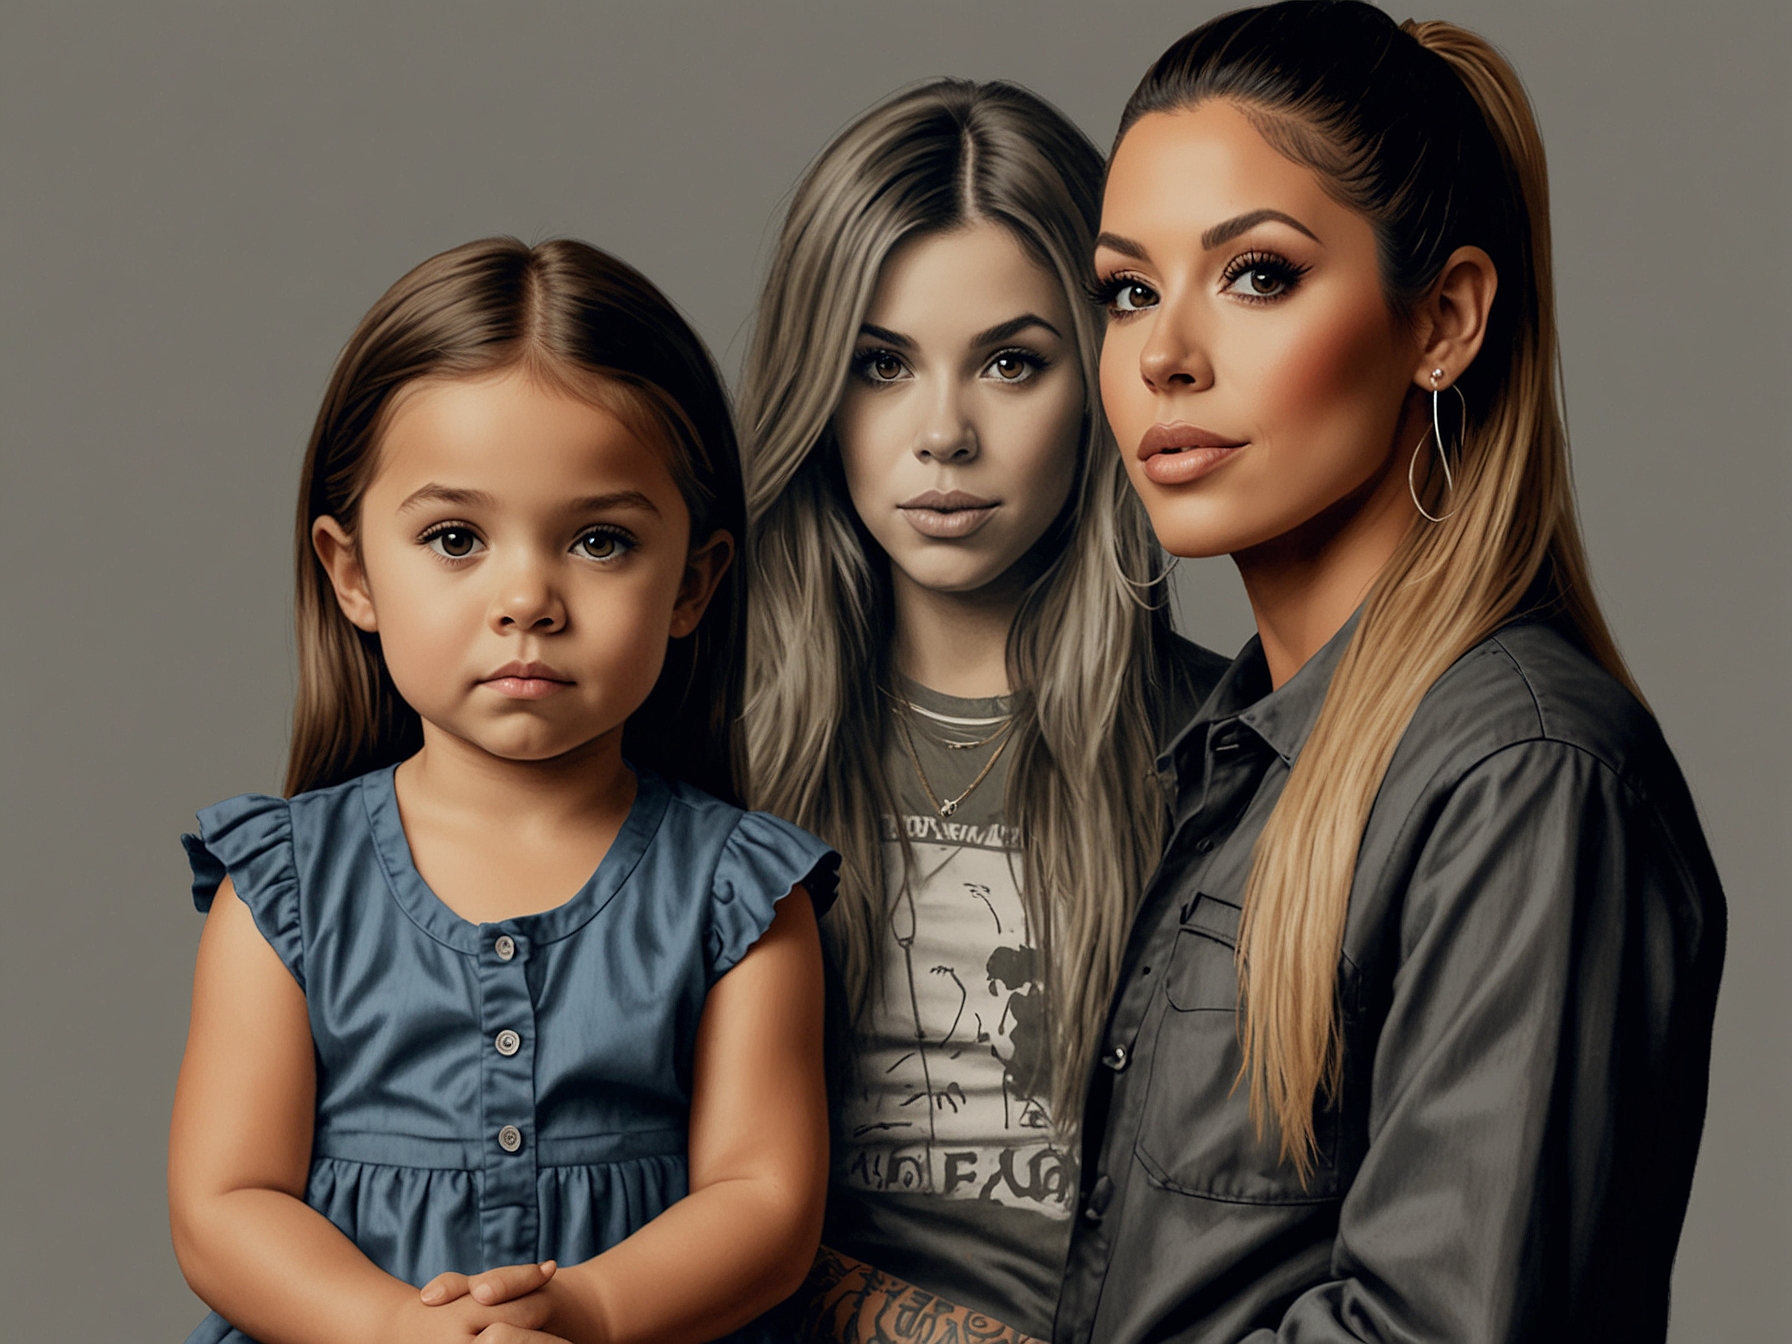 Travis Barker, Kourtney Kardashian, and their blended family on social media, compared with Shanna Moakler's depiction of her own parenting dynamics highlighting media bias.